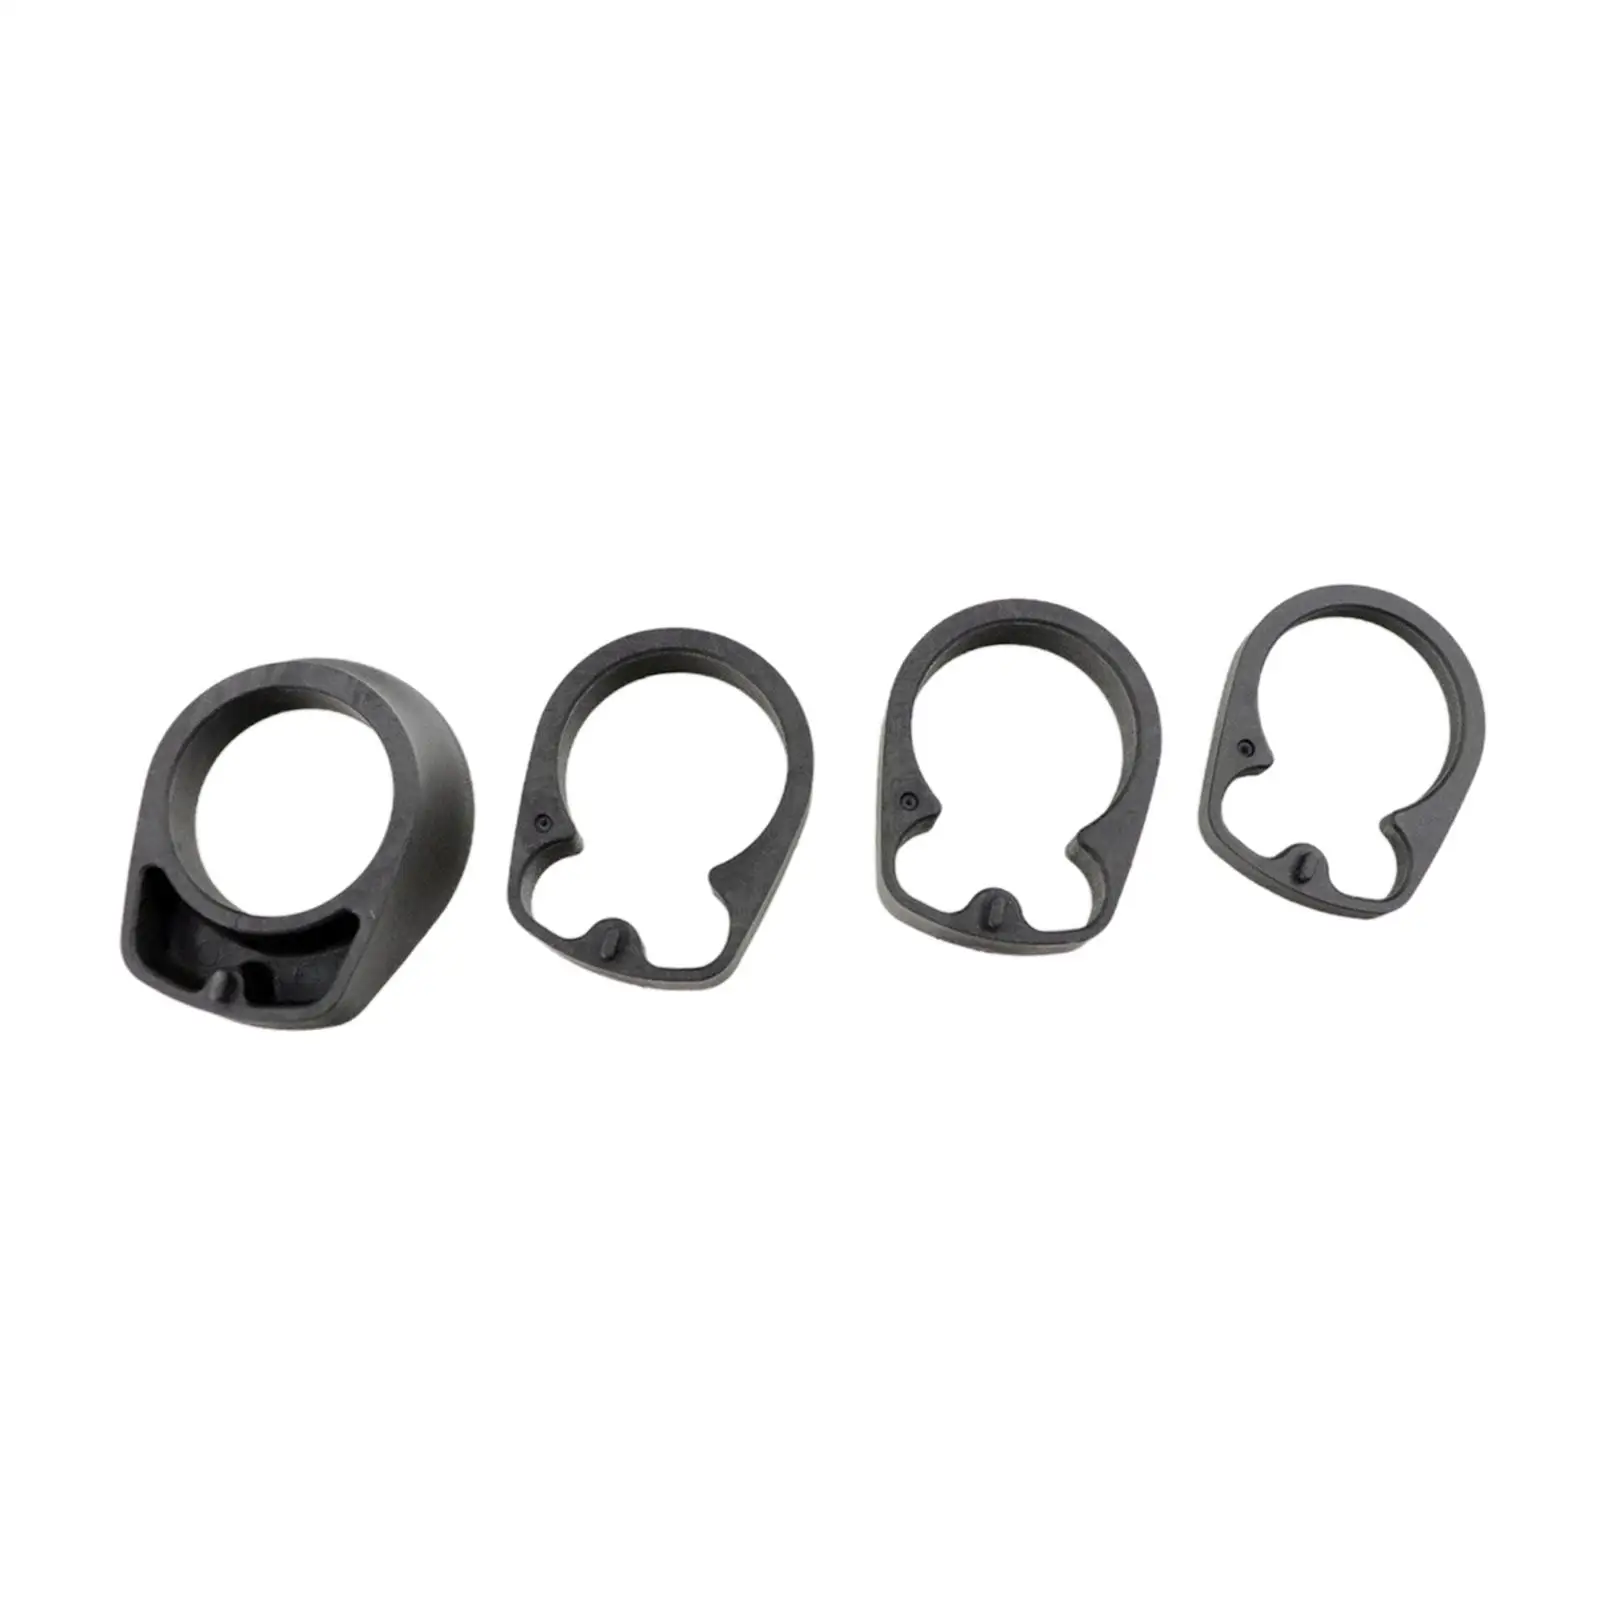 4x Bike Curved Handlebar Spacer Headset Tools Durable Raise up Adjustable for